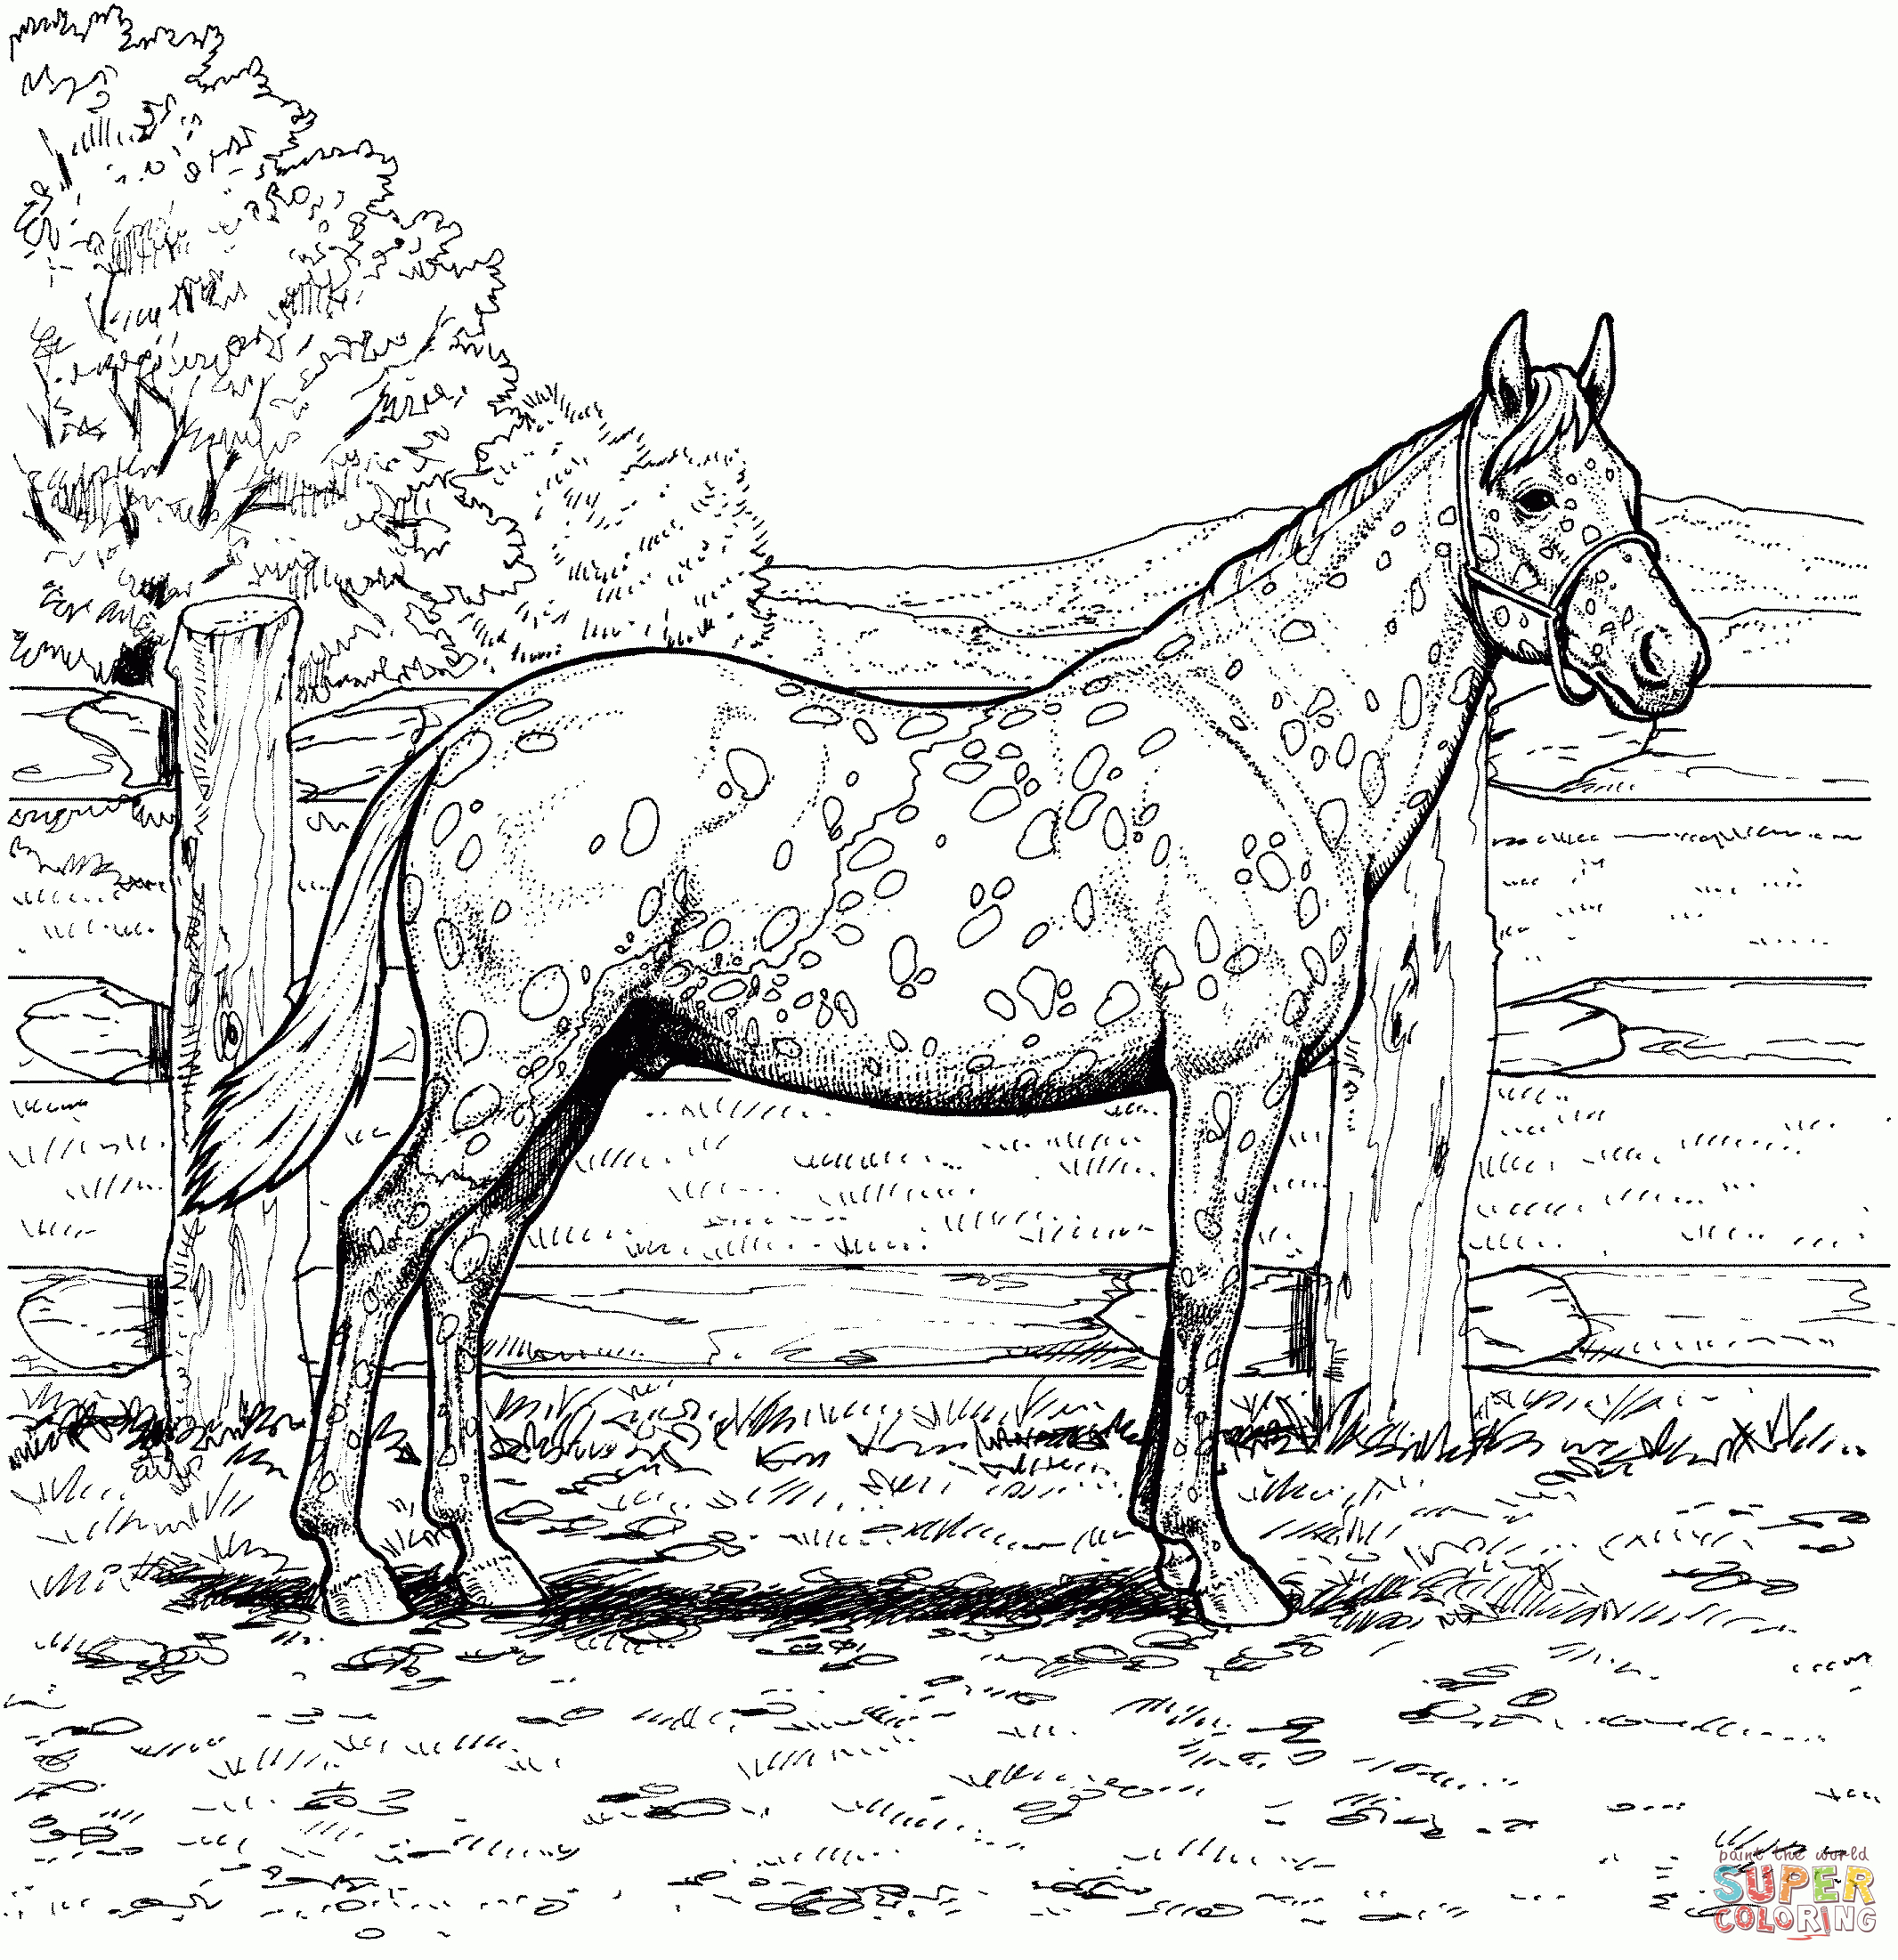 Appaloosa Horse Coloring Page | Free Printable Coloring Pages - Free Printable Realistic Horse Coloring Pages